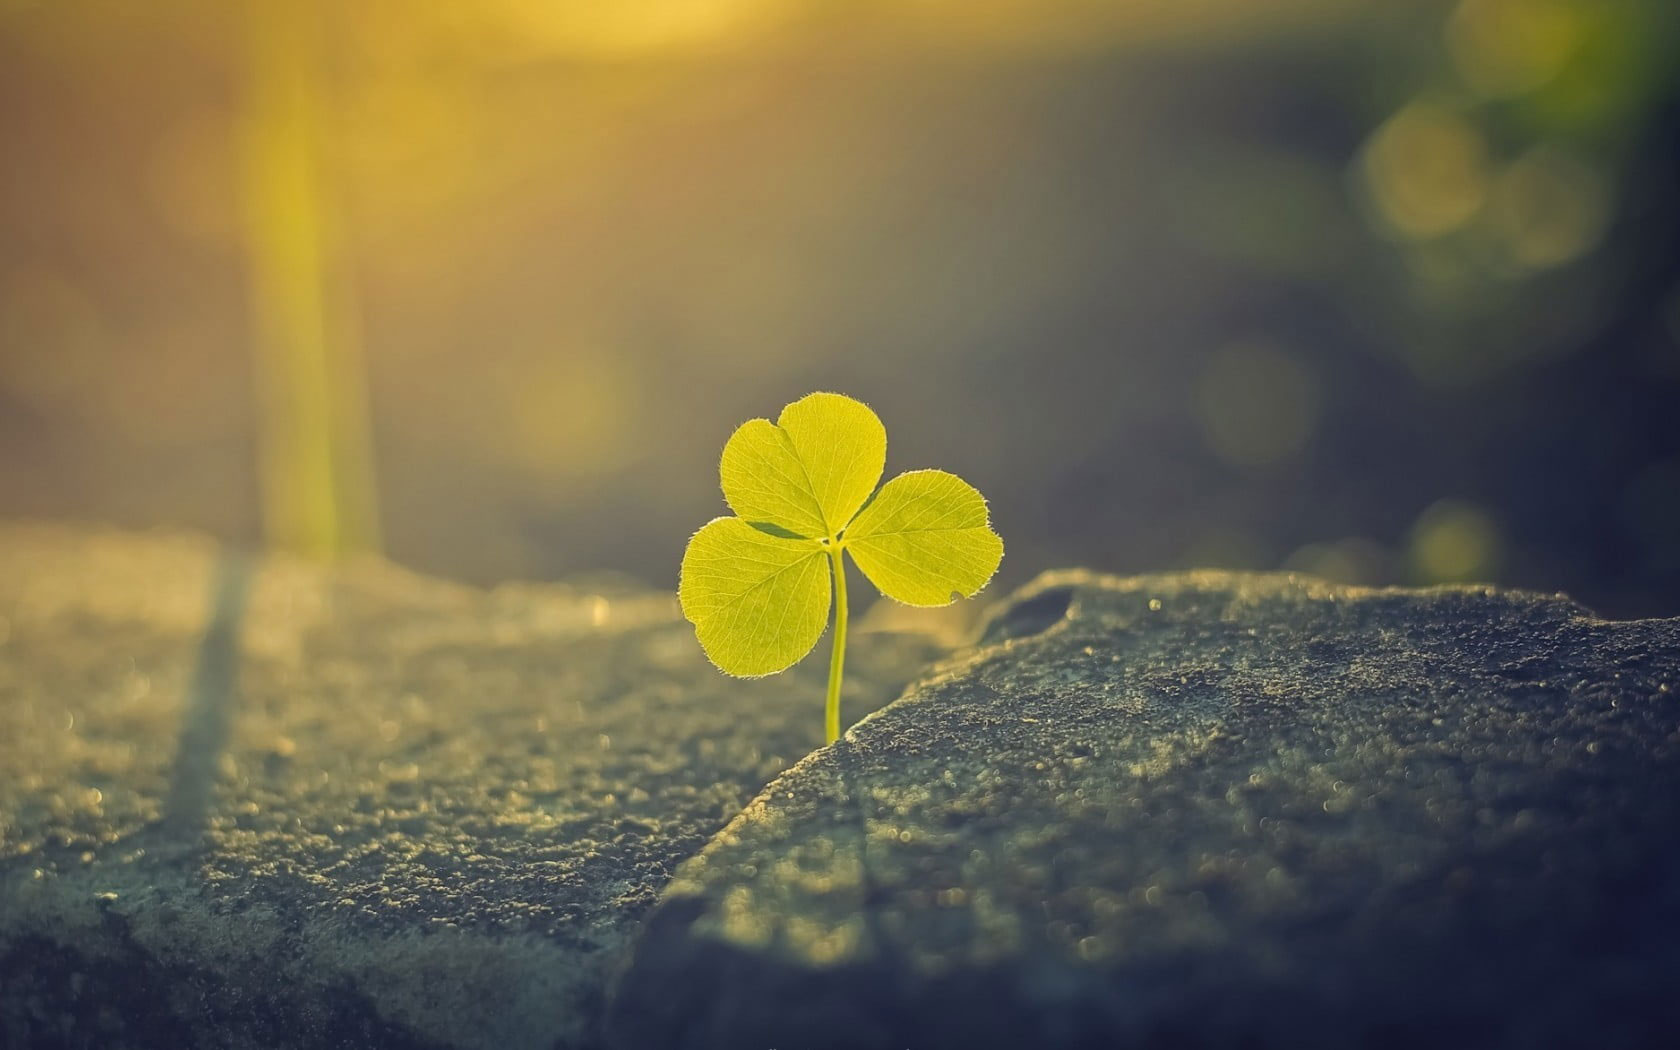 Green leafed plant wallpaper, green three leaf clover, nature, macro, depth of field